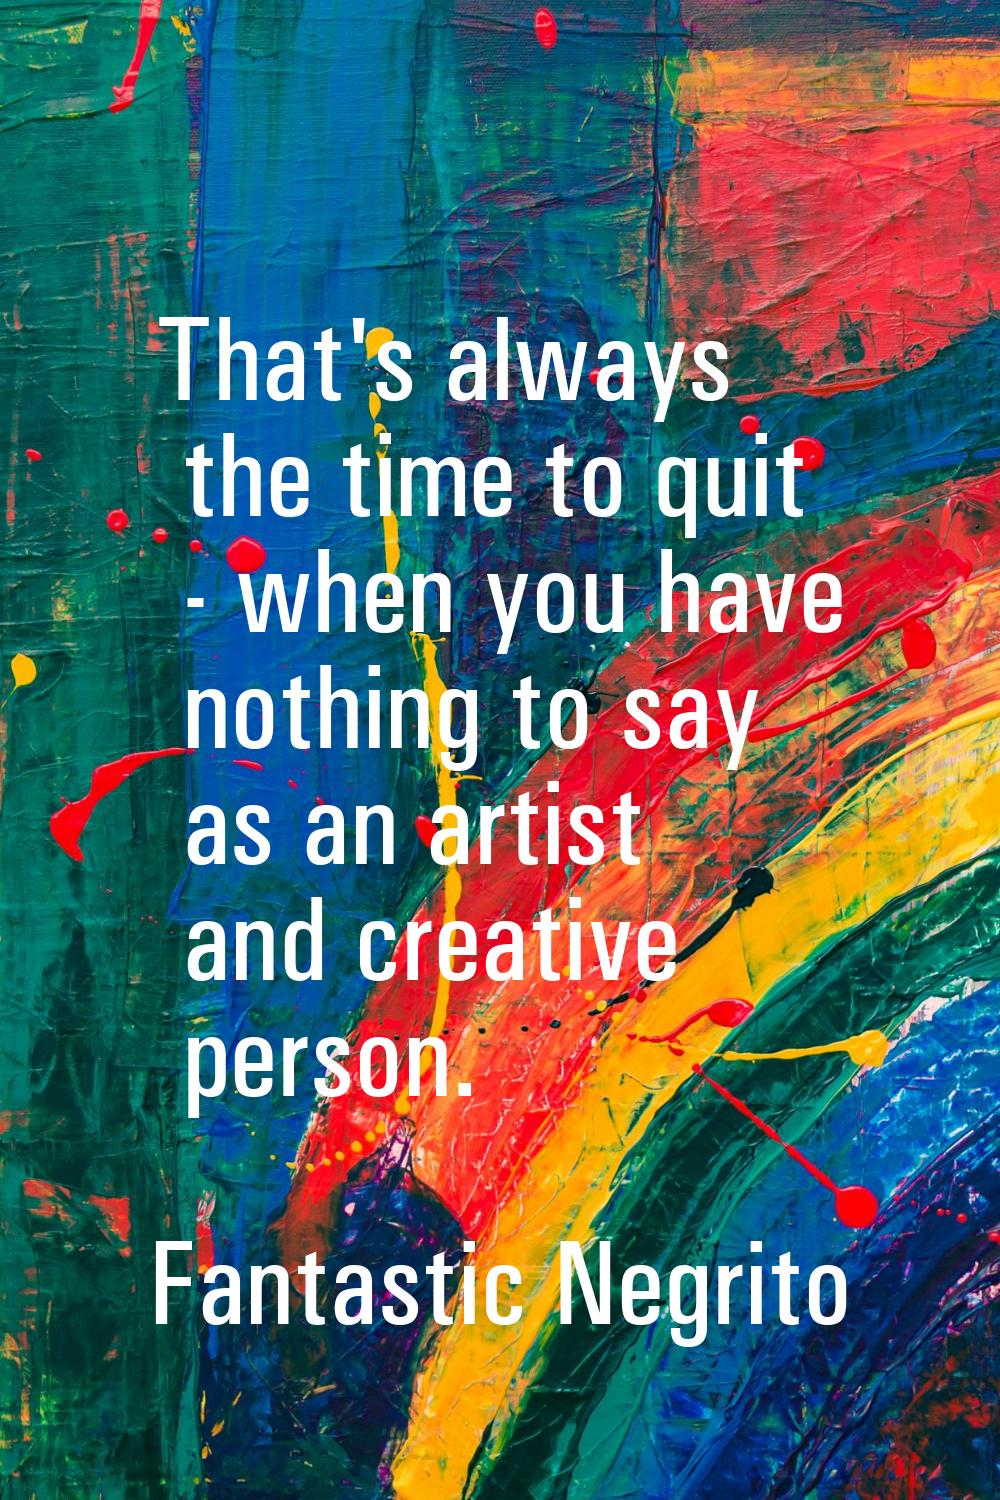 That's always the time to quit - when you have nothing to say as an artist and creative person.